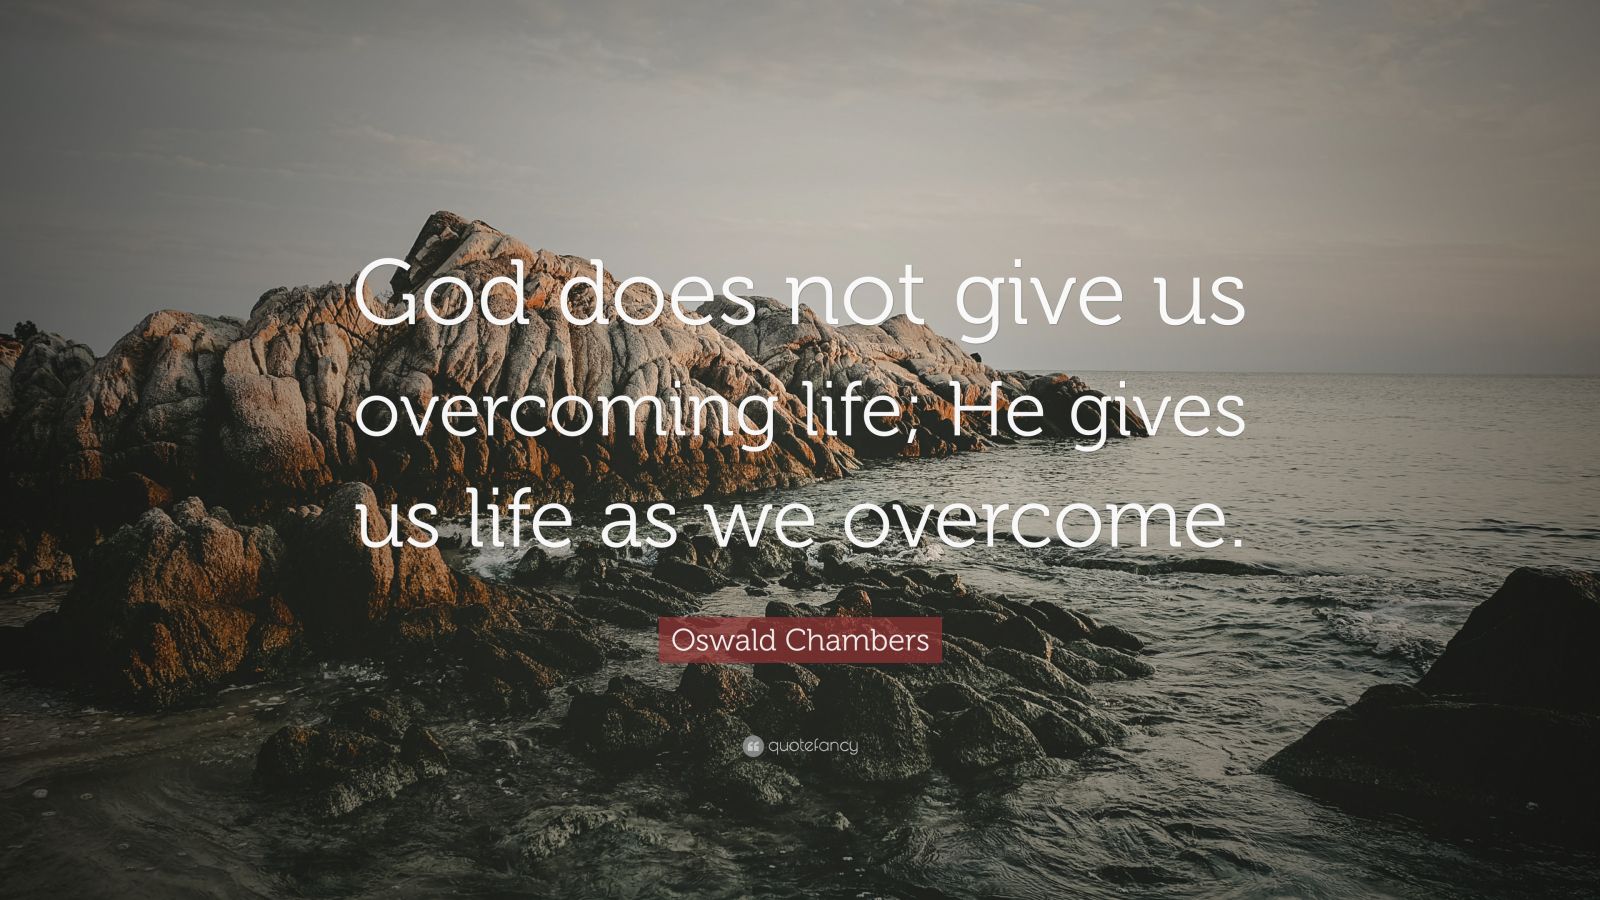 Oswald Chambers Quote: “God does not give us overcoming life; He gives ...